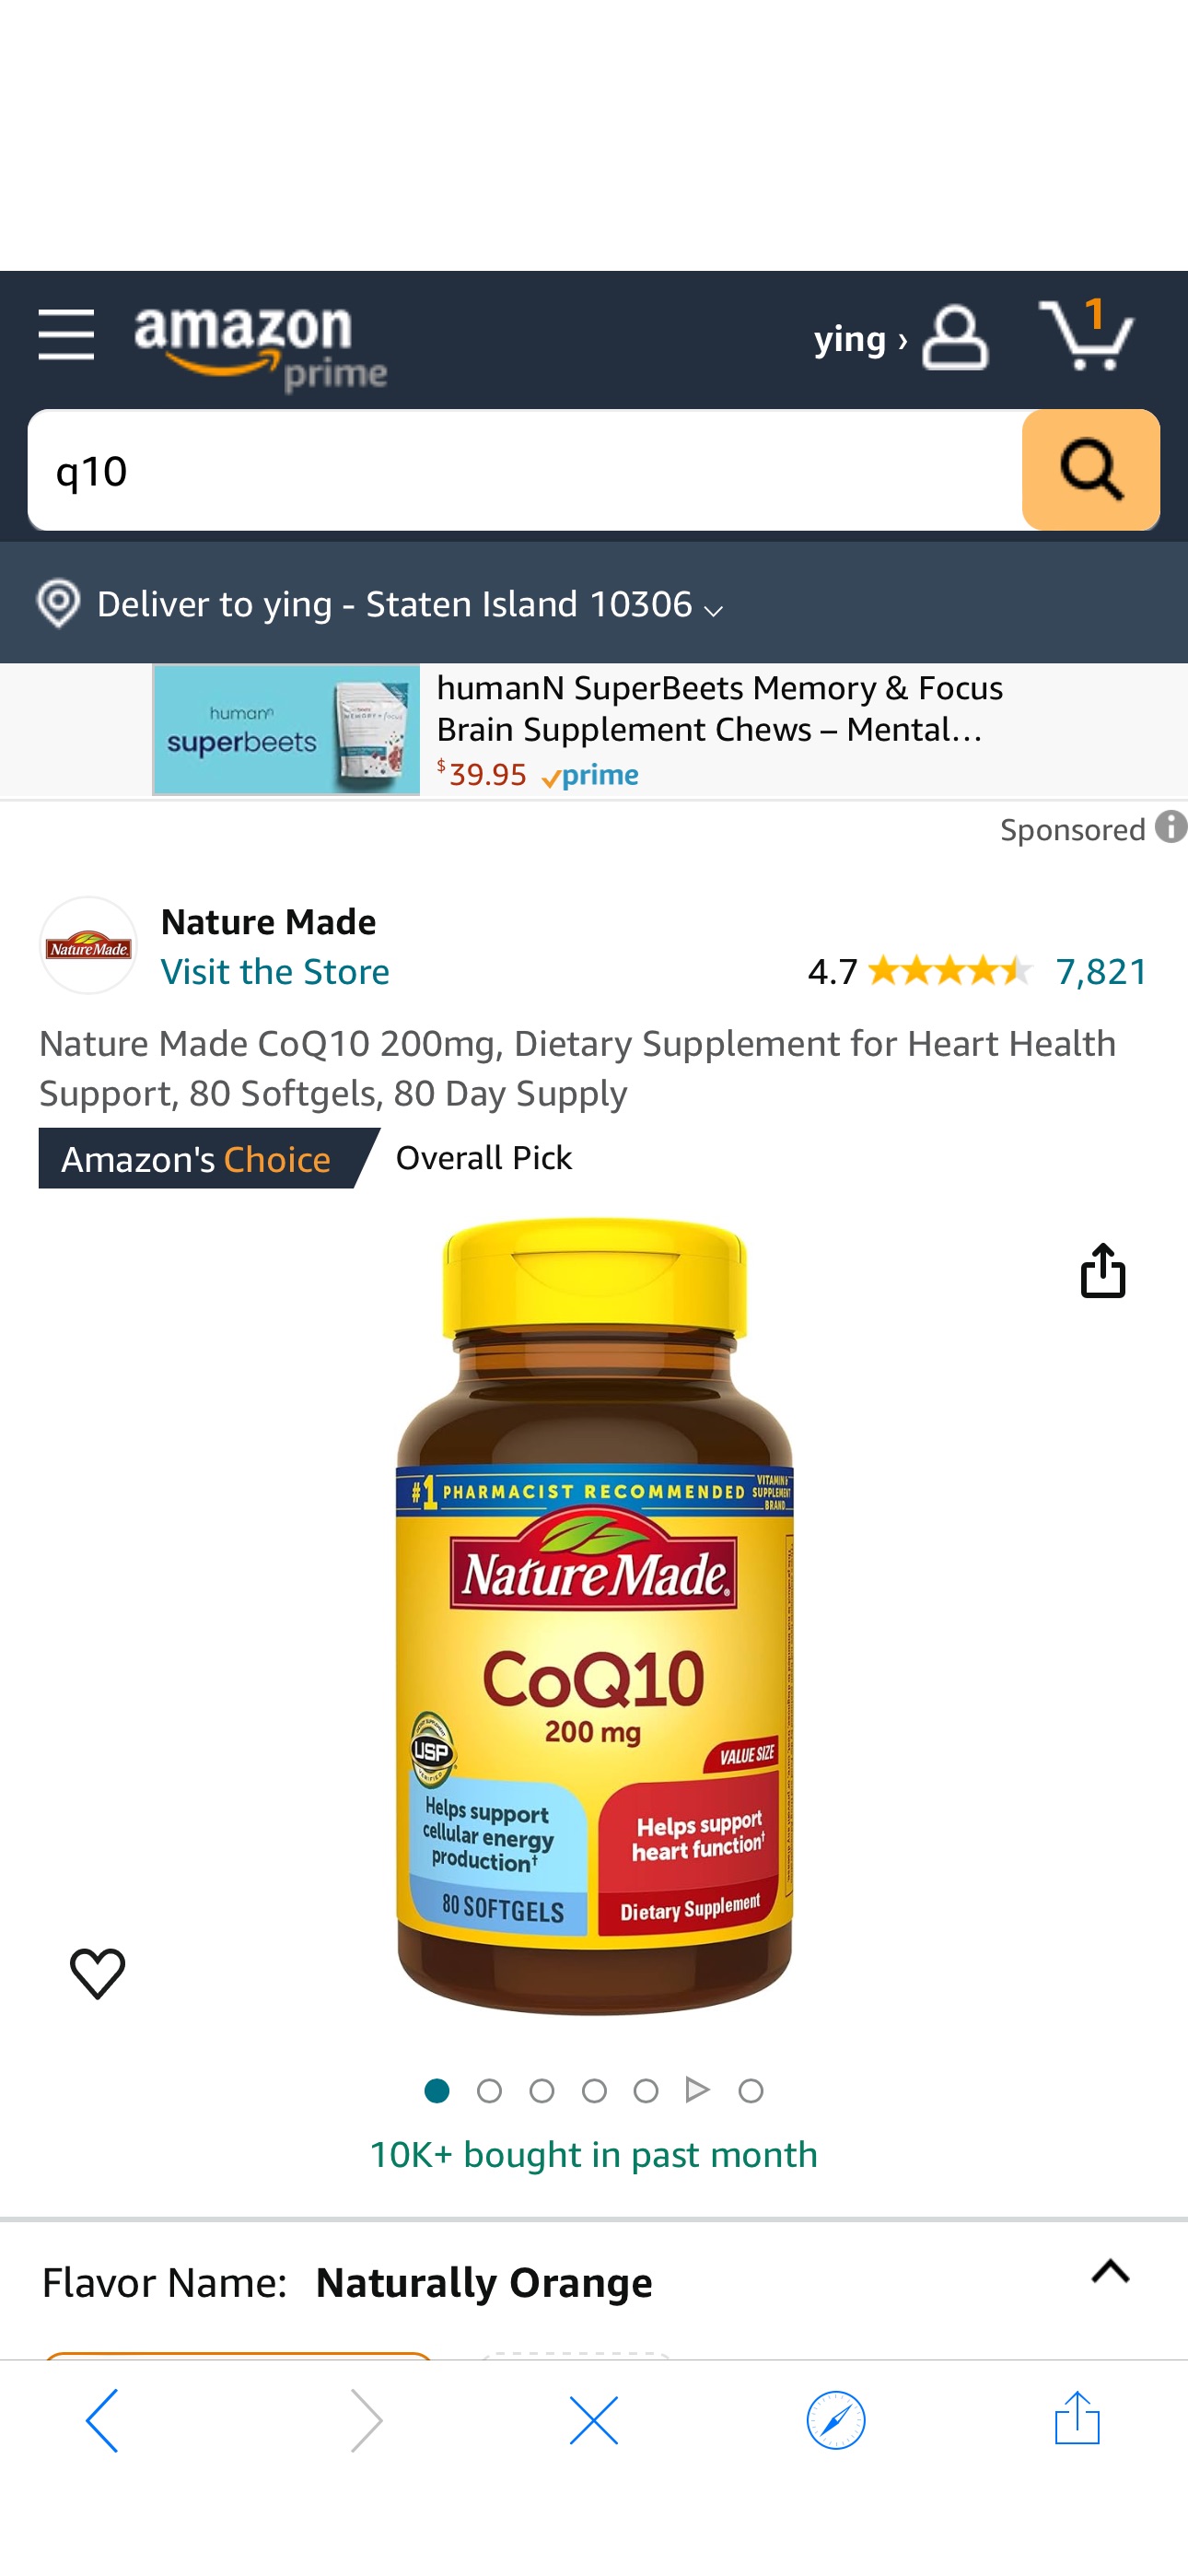 Amazon.com: Nature Made CoQ10 200mg, Dietary Supplement for Heart Health Support, 80 Softgels, 80 Day Supply : Health & Household